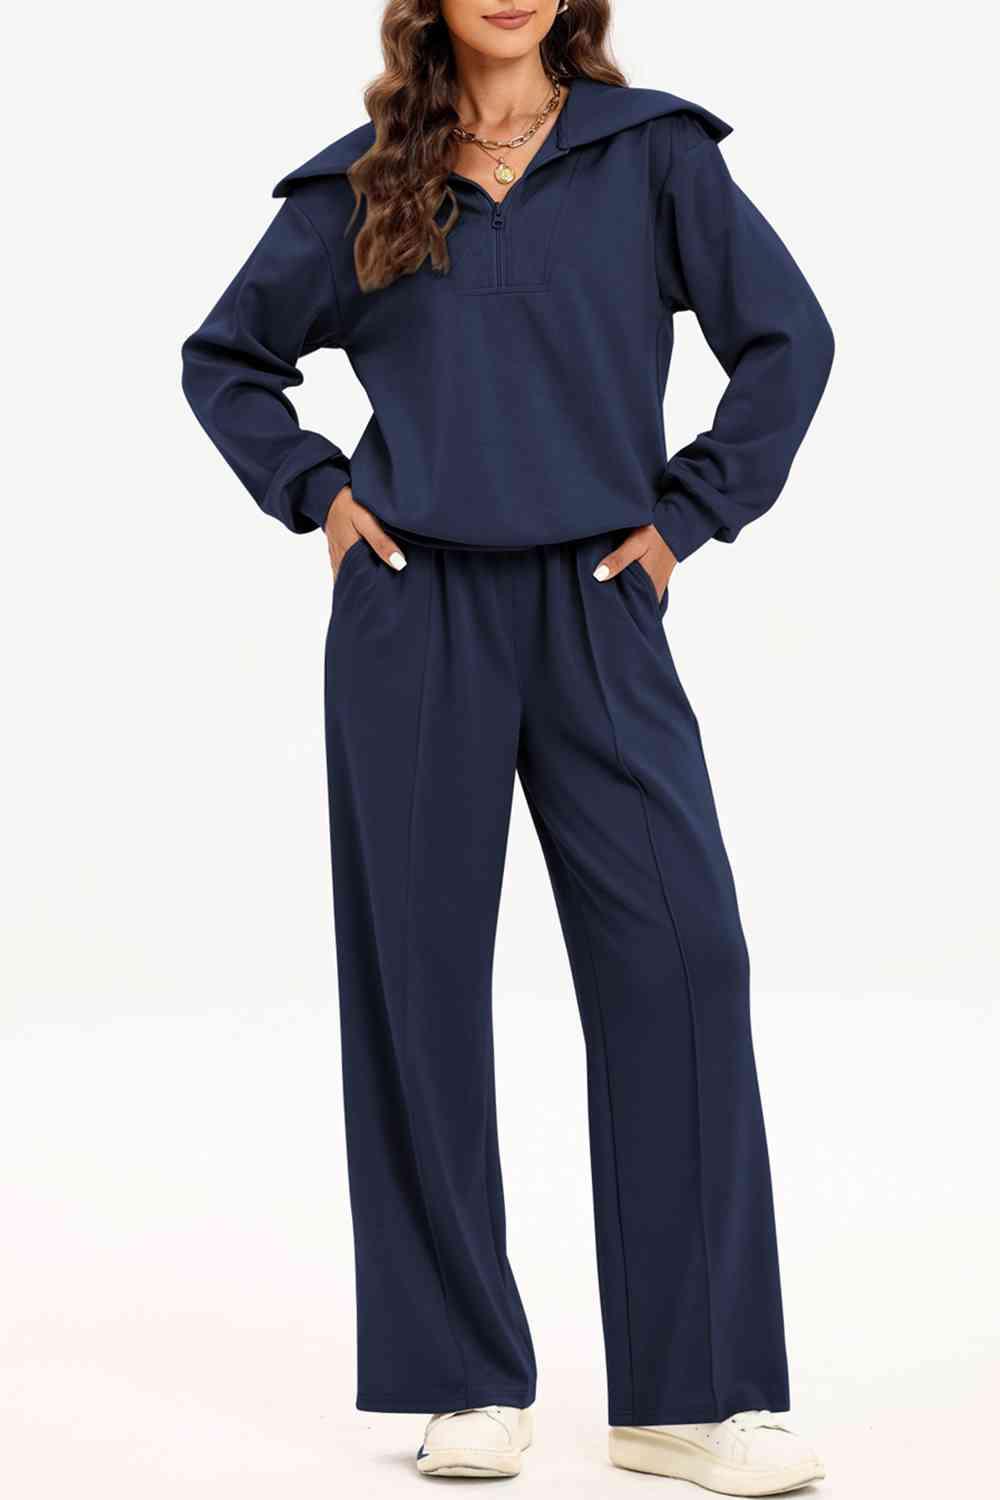 a woman wearing a blue jumpsuit and white sneakers